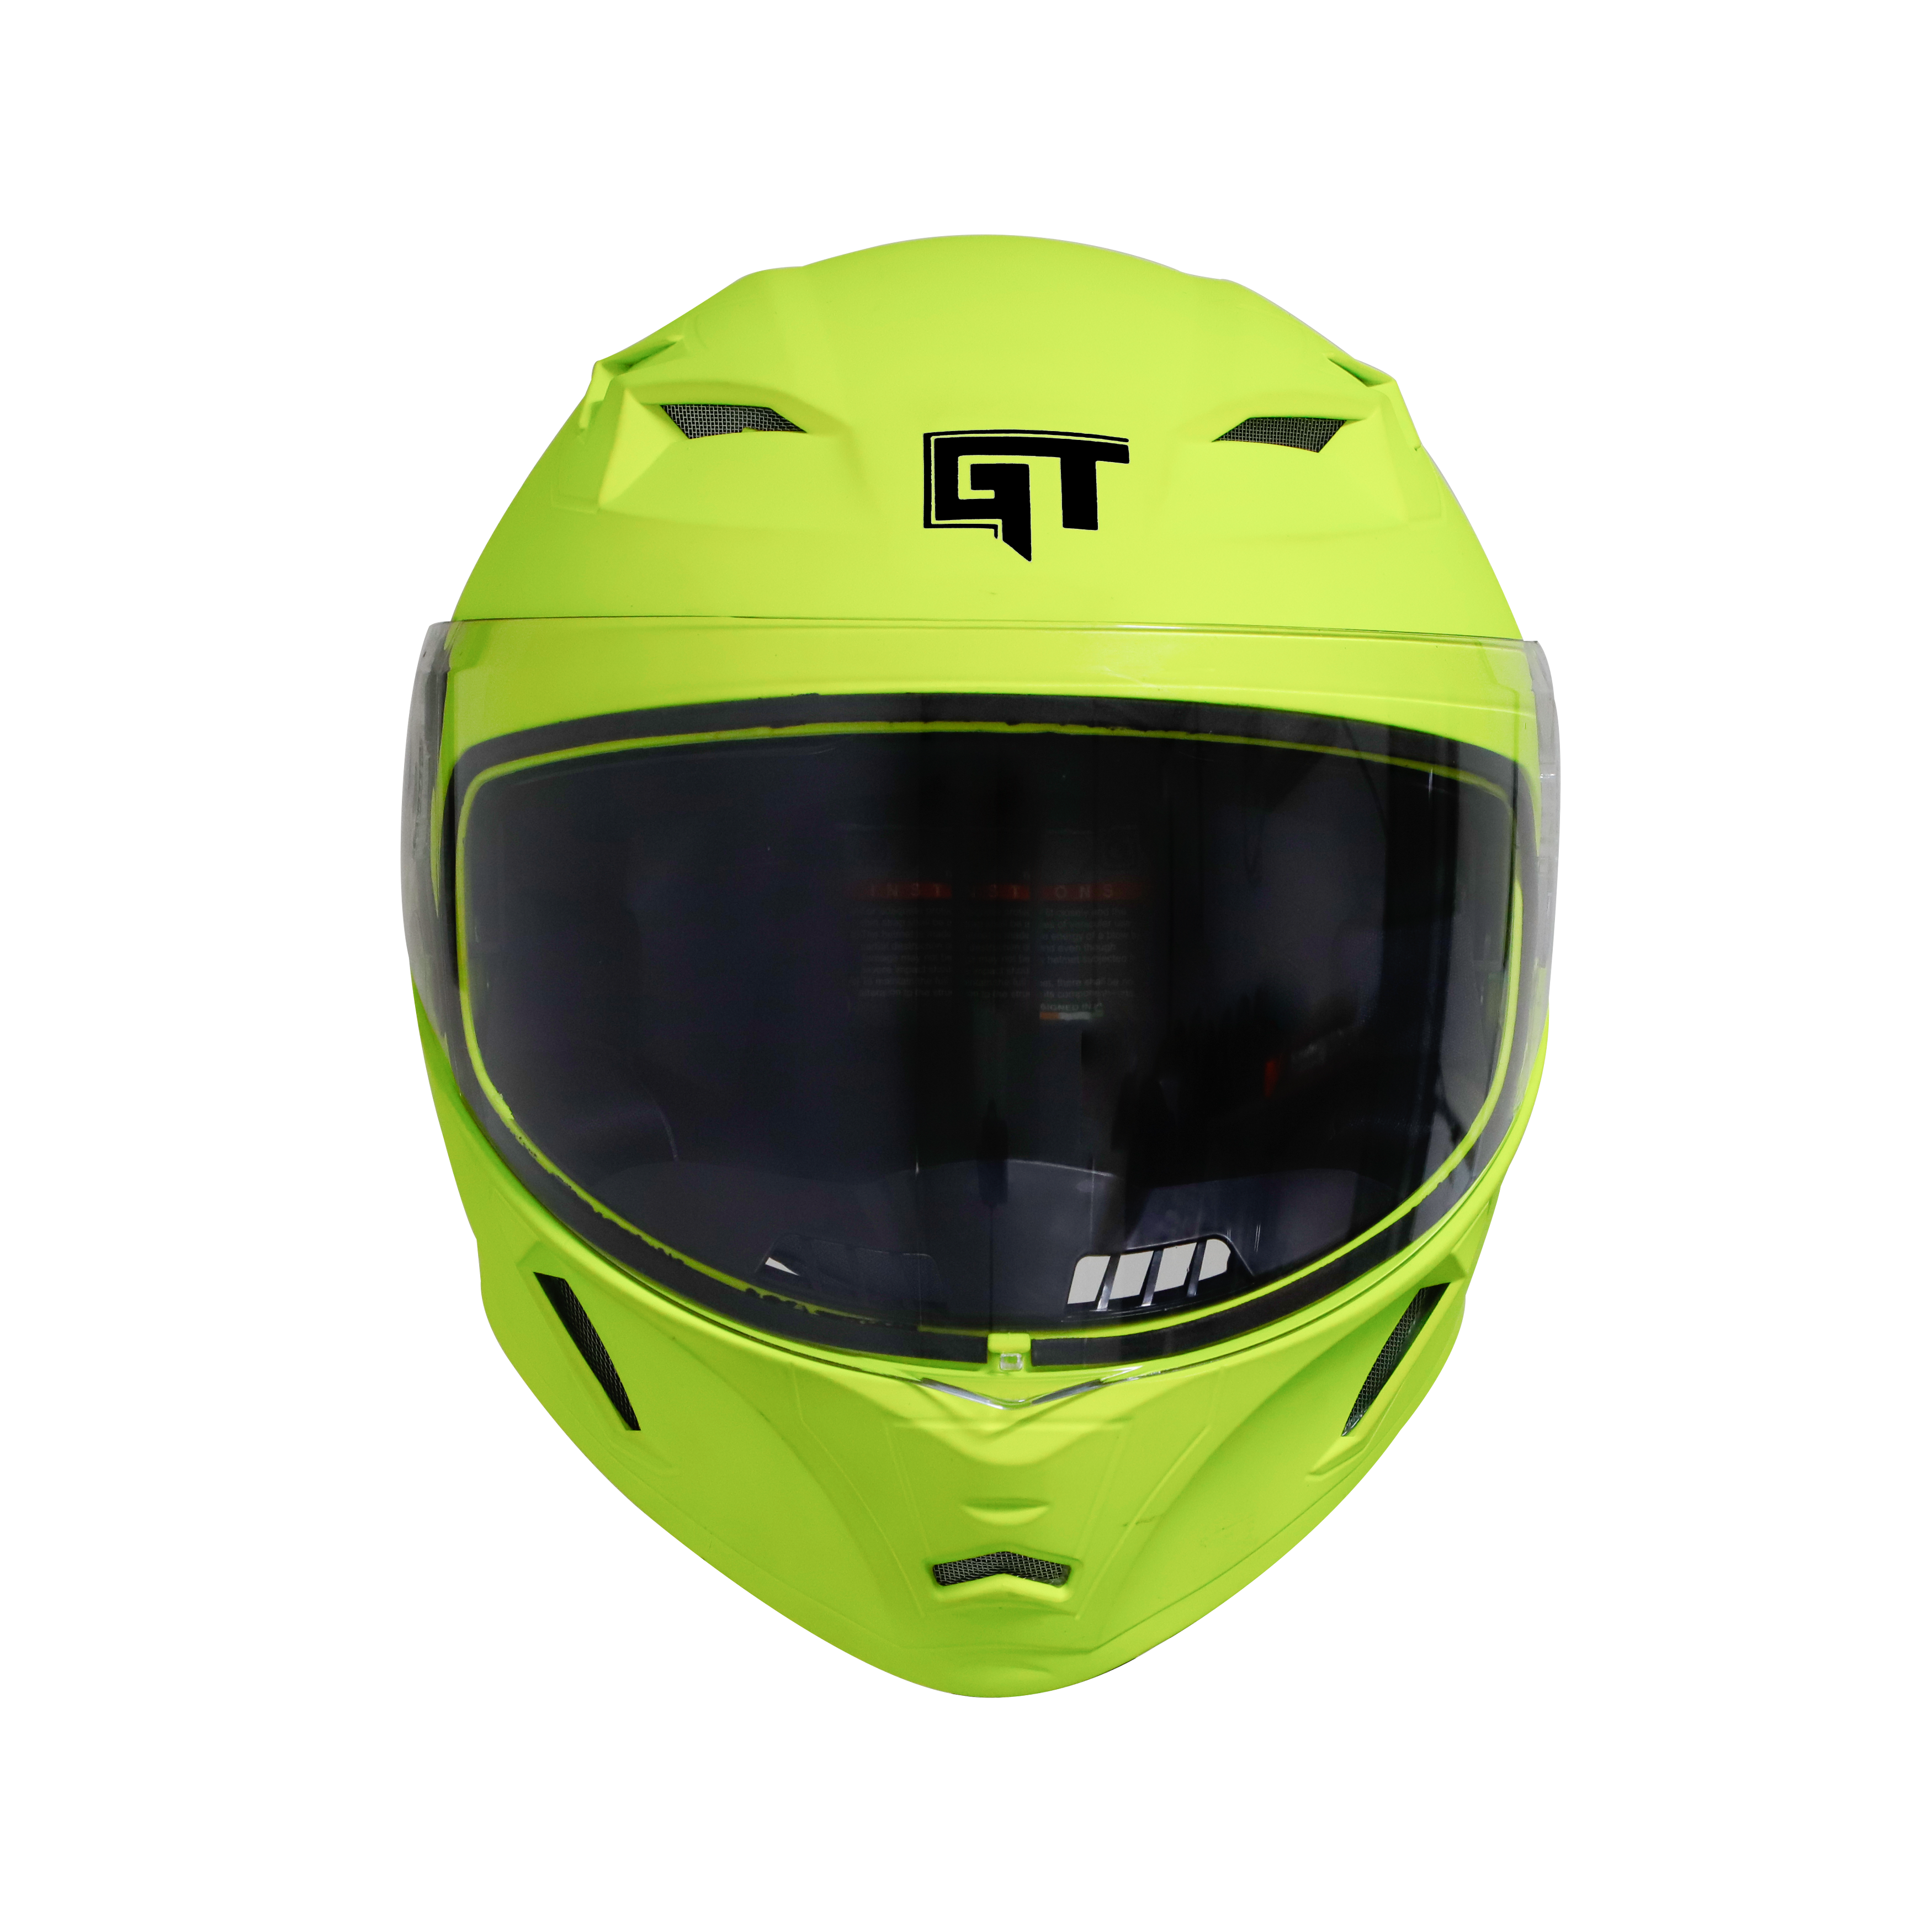 Steelbird SBA-21 GT Full Face ISI Certified Helmet (Glossy Fluo Neon With Clear Visor)